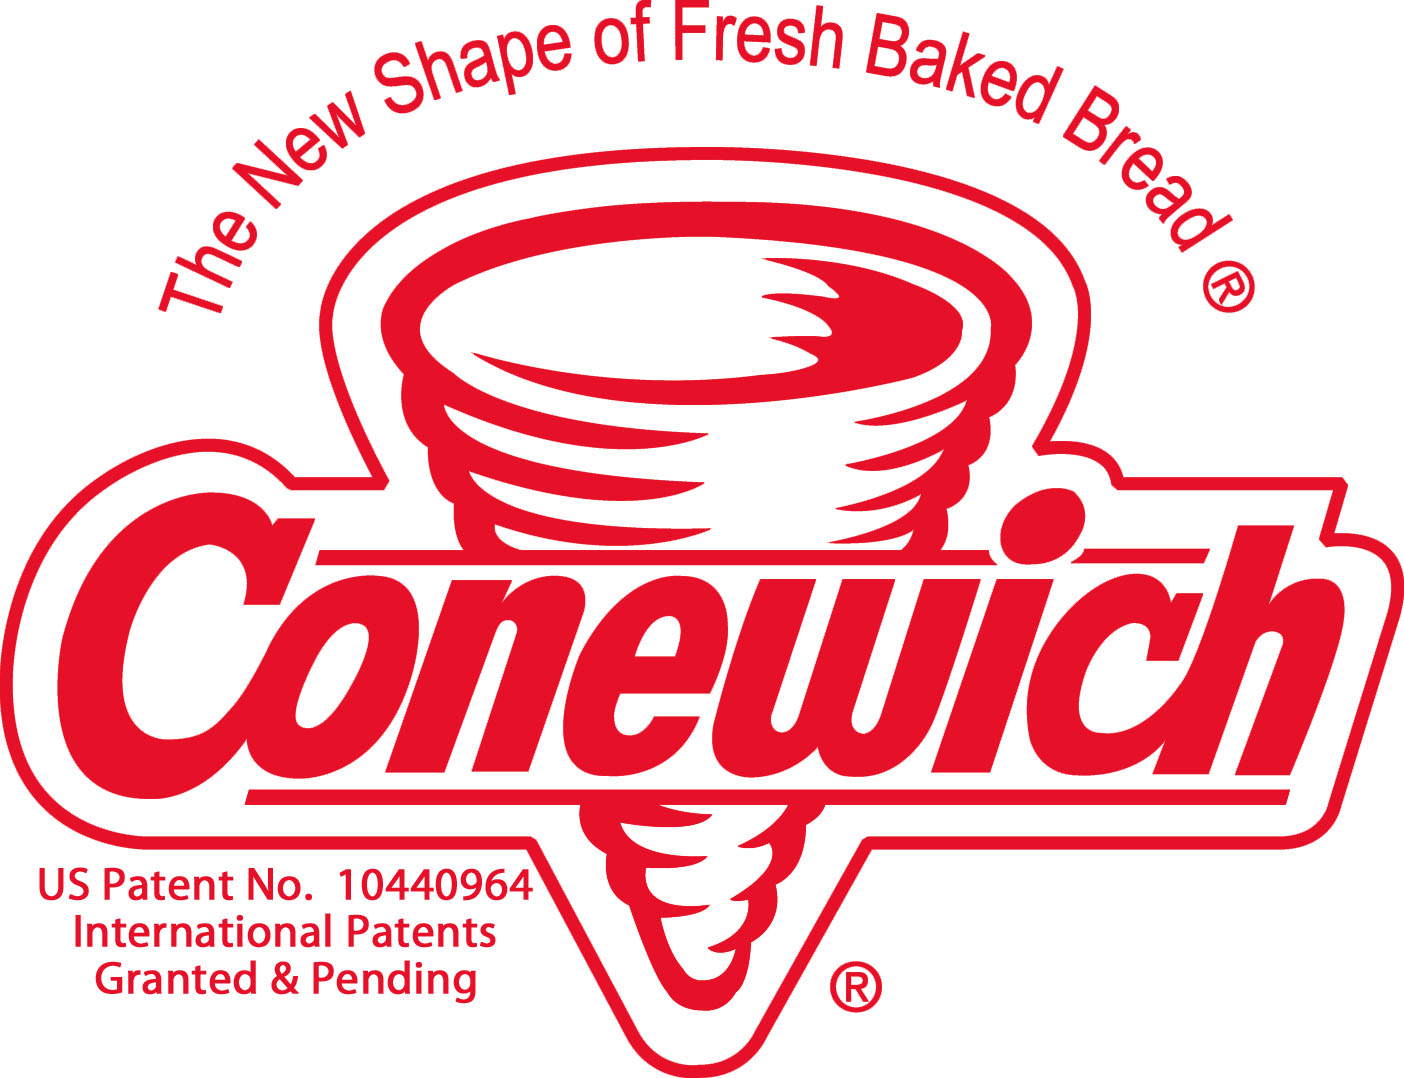 Conewich Logo White Background Red Lettering